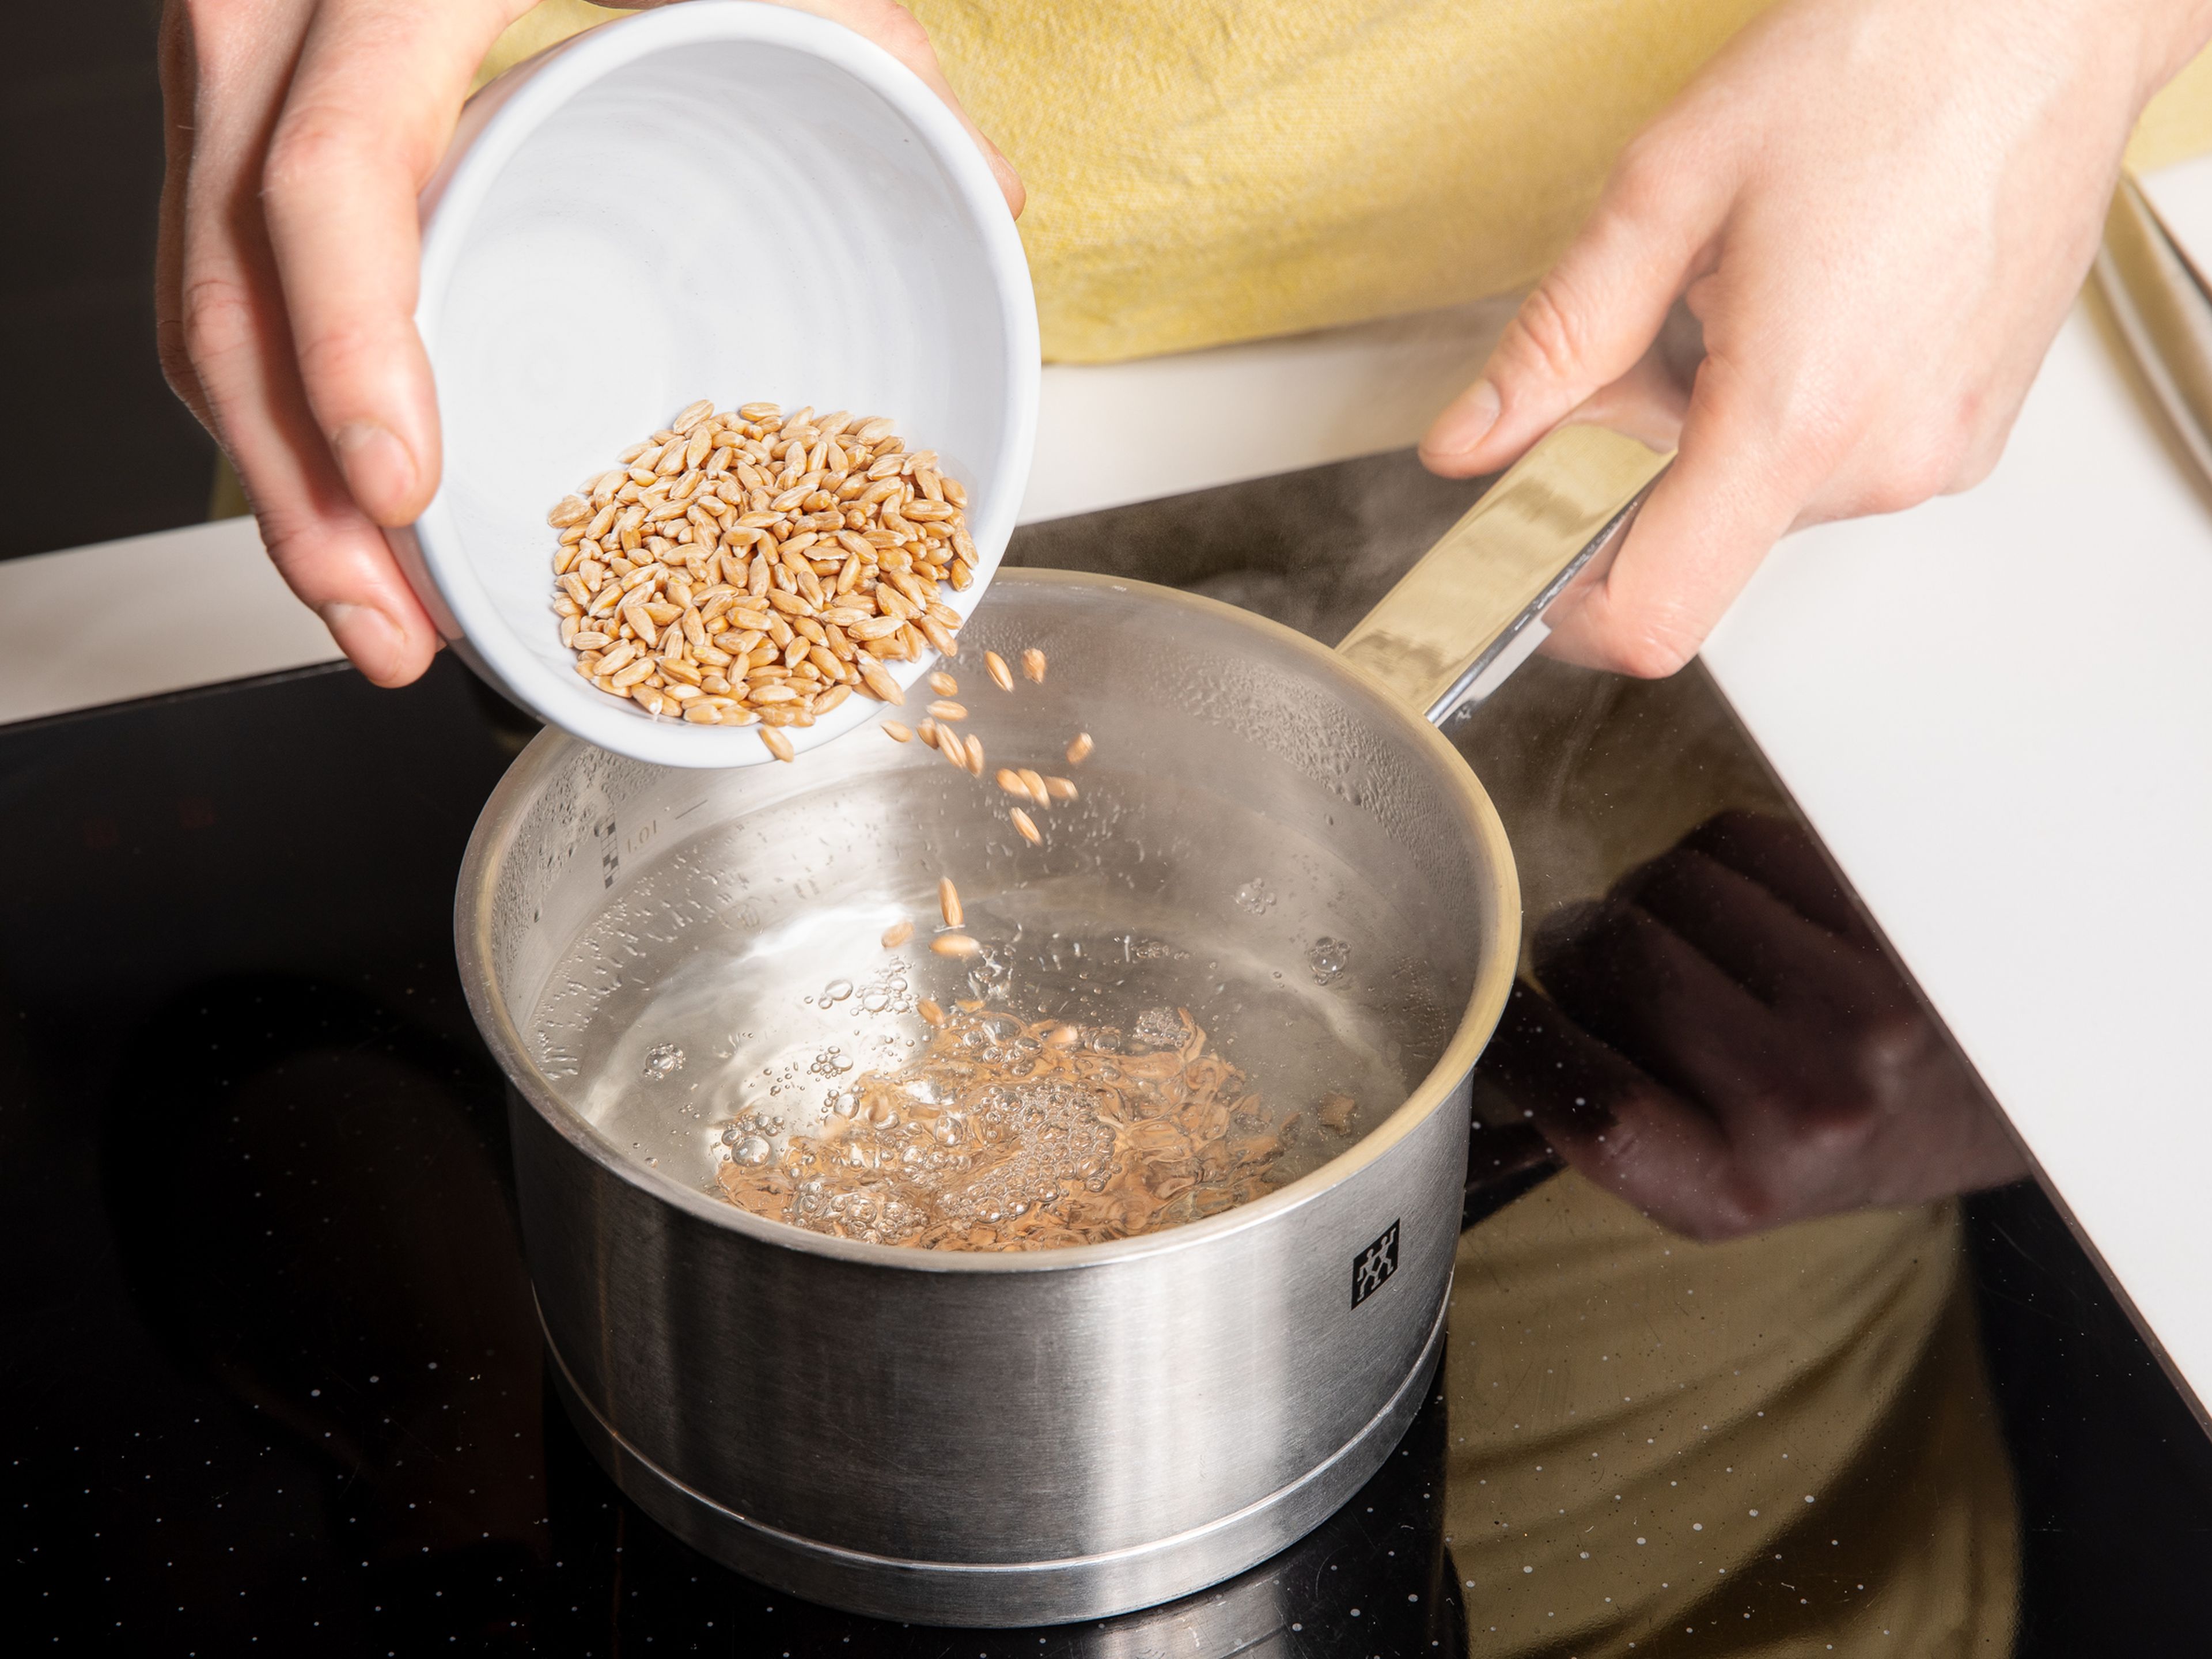 In the meantime, add spelt to a fine sieve and rinse under cold running water. Drain well and add to a pot of boiling water. Cook for approx. 50 min., or until spelt is chewy and cooked through. Drain and set aside.